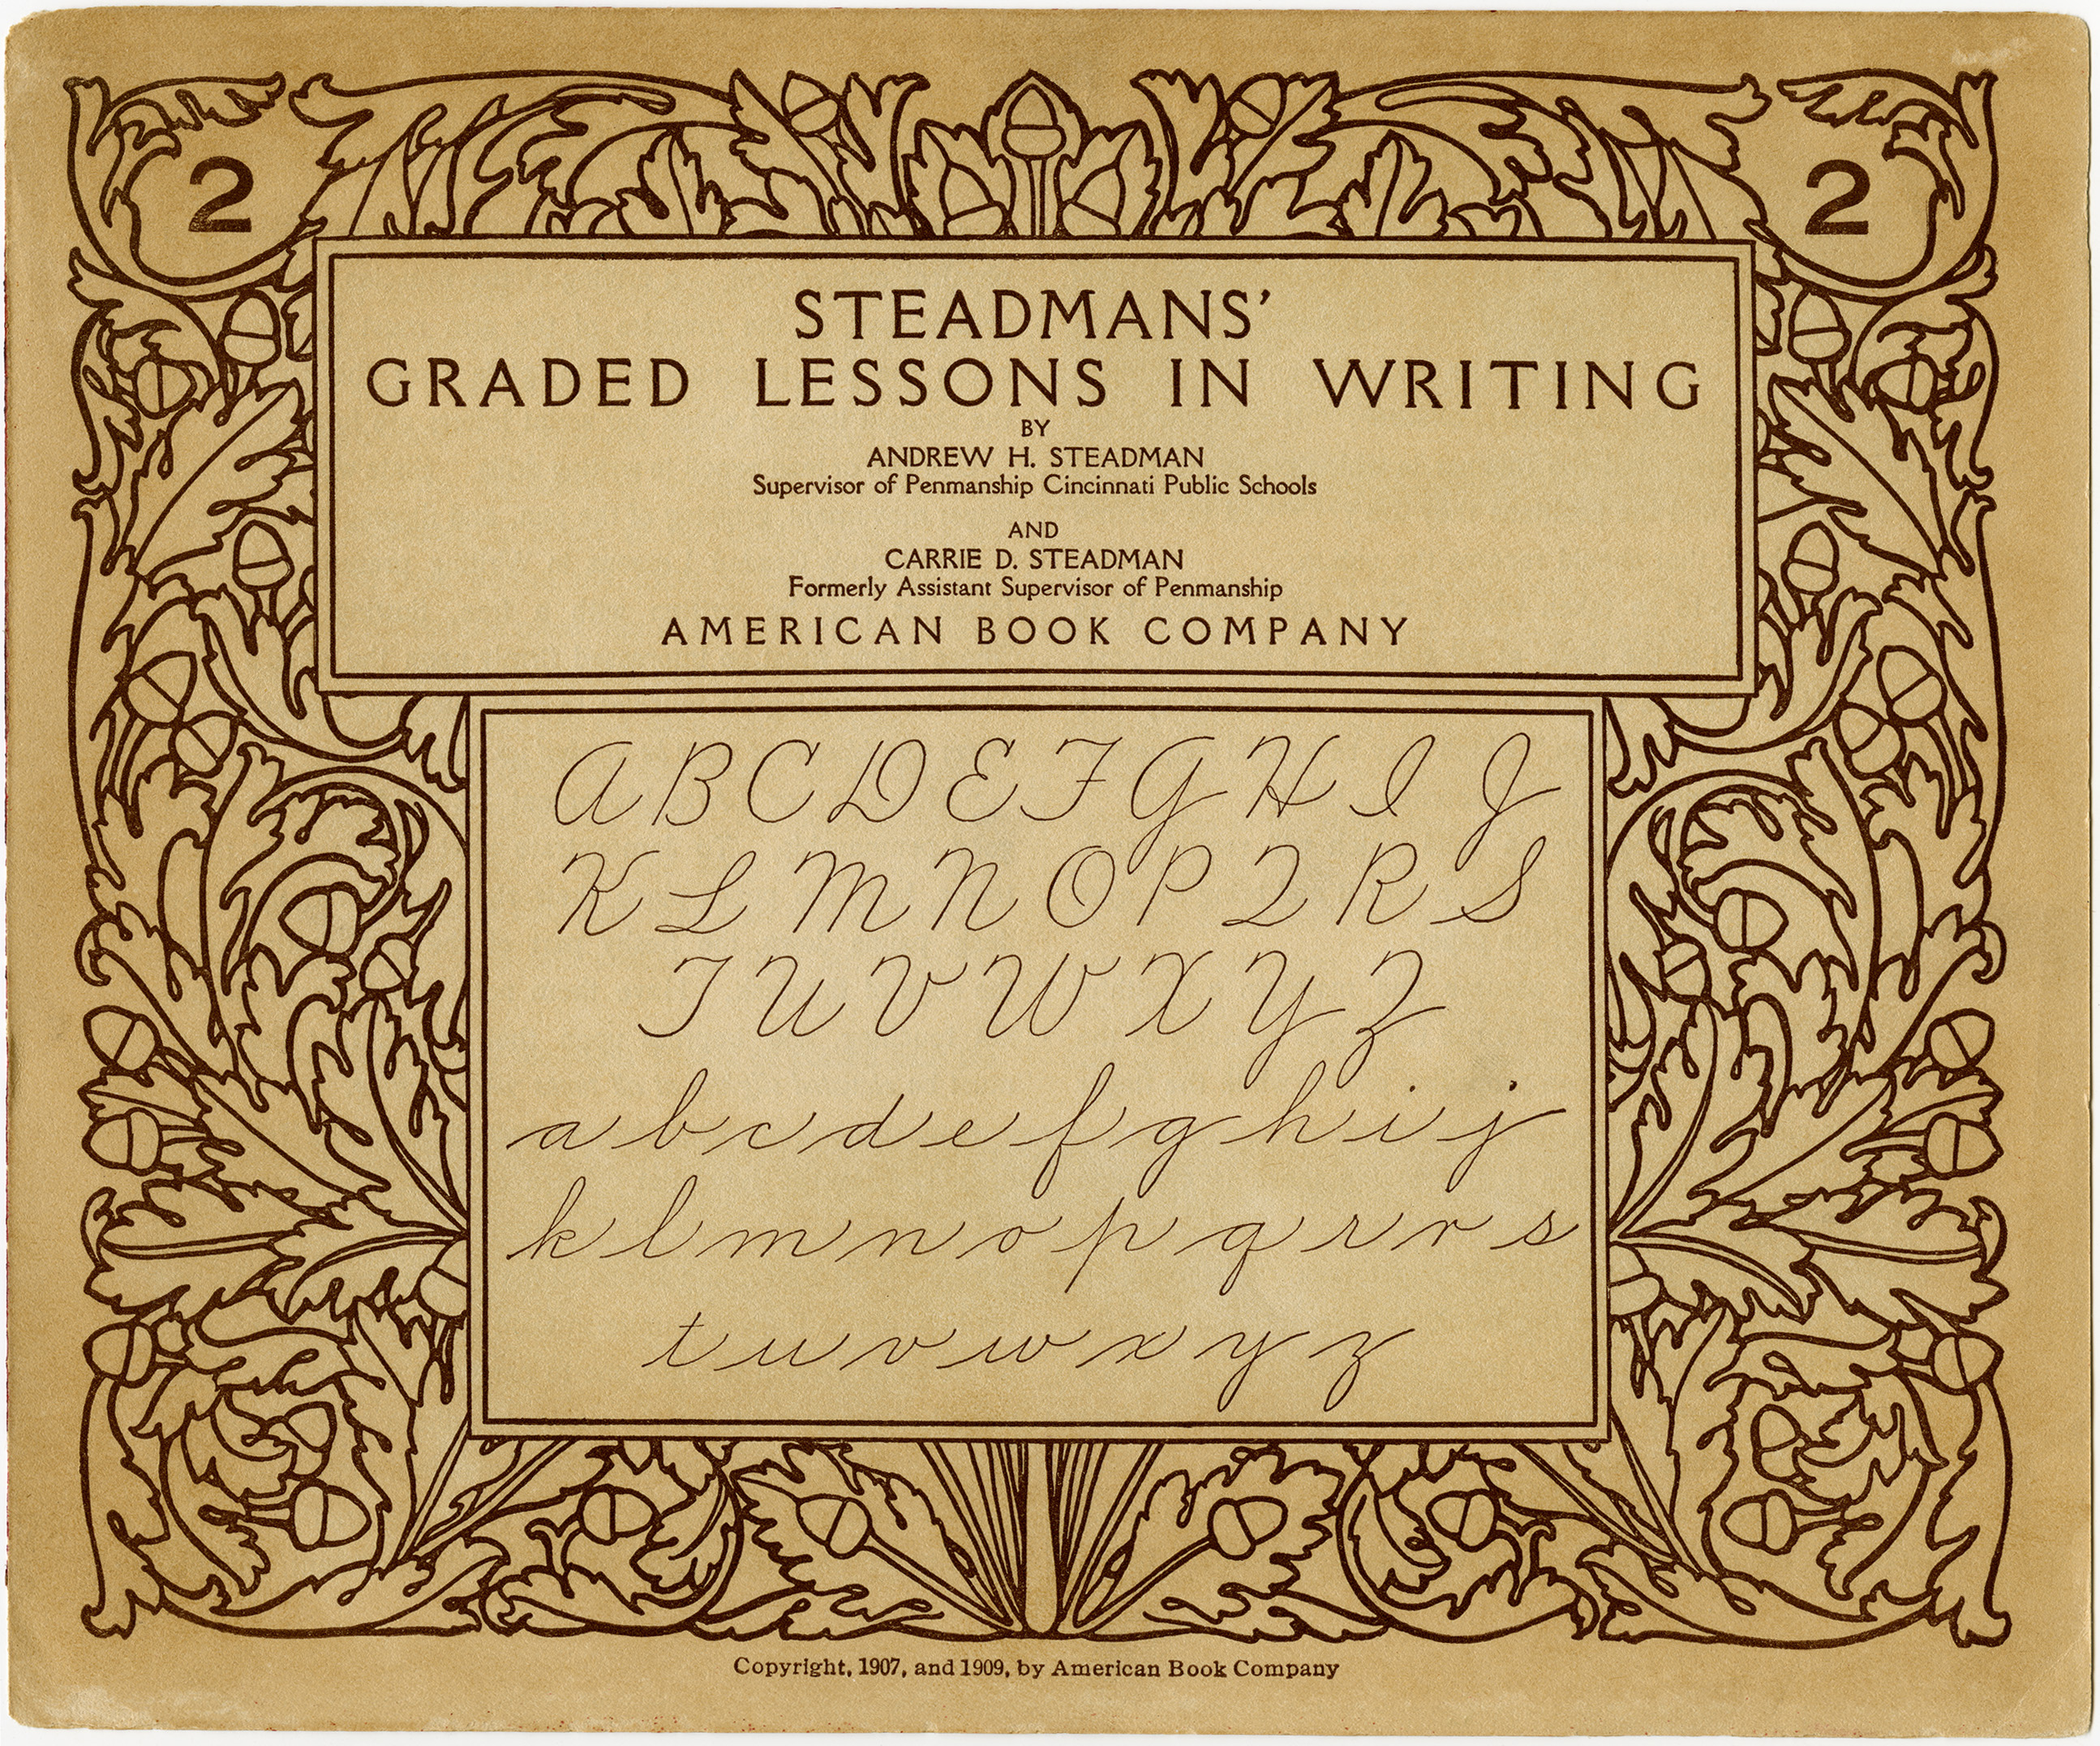 steadmans writing lessons booklet, old school printable